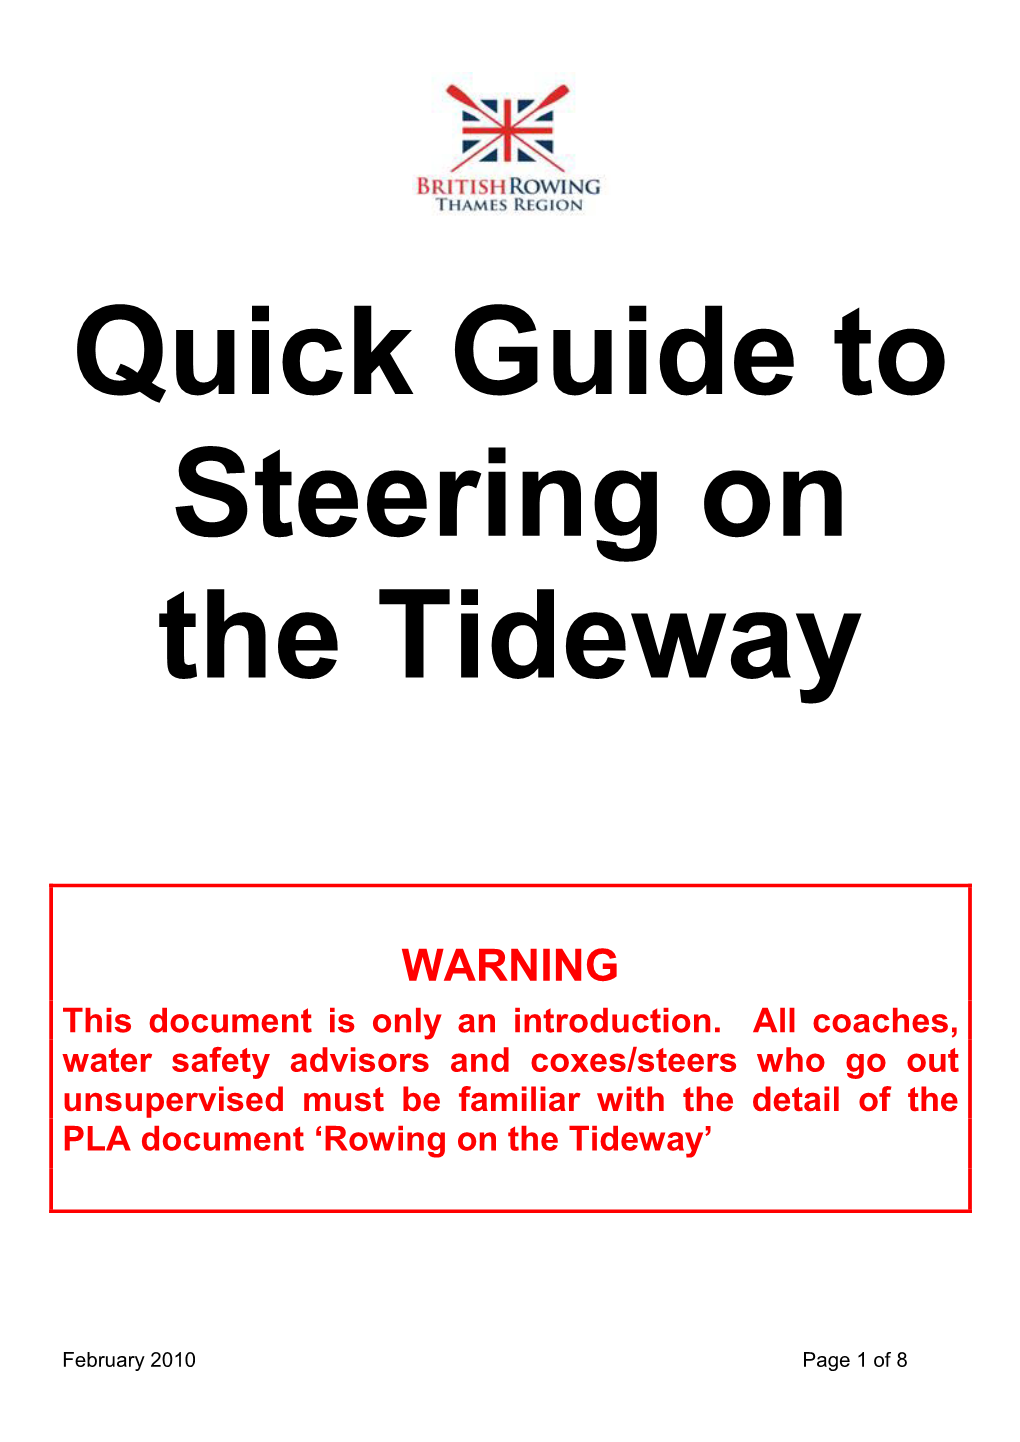 Quick Guide to Steering on the Tideway